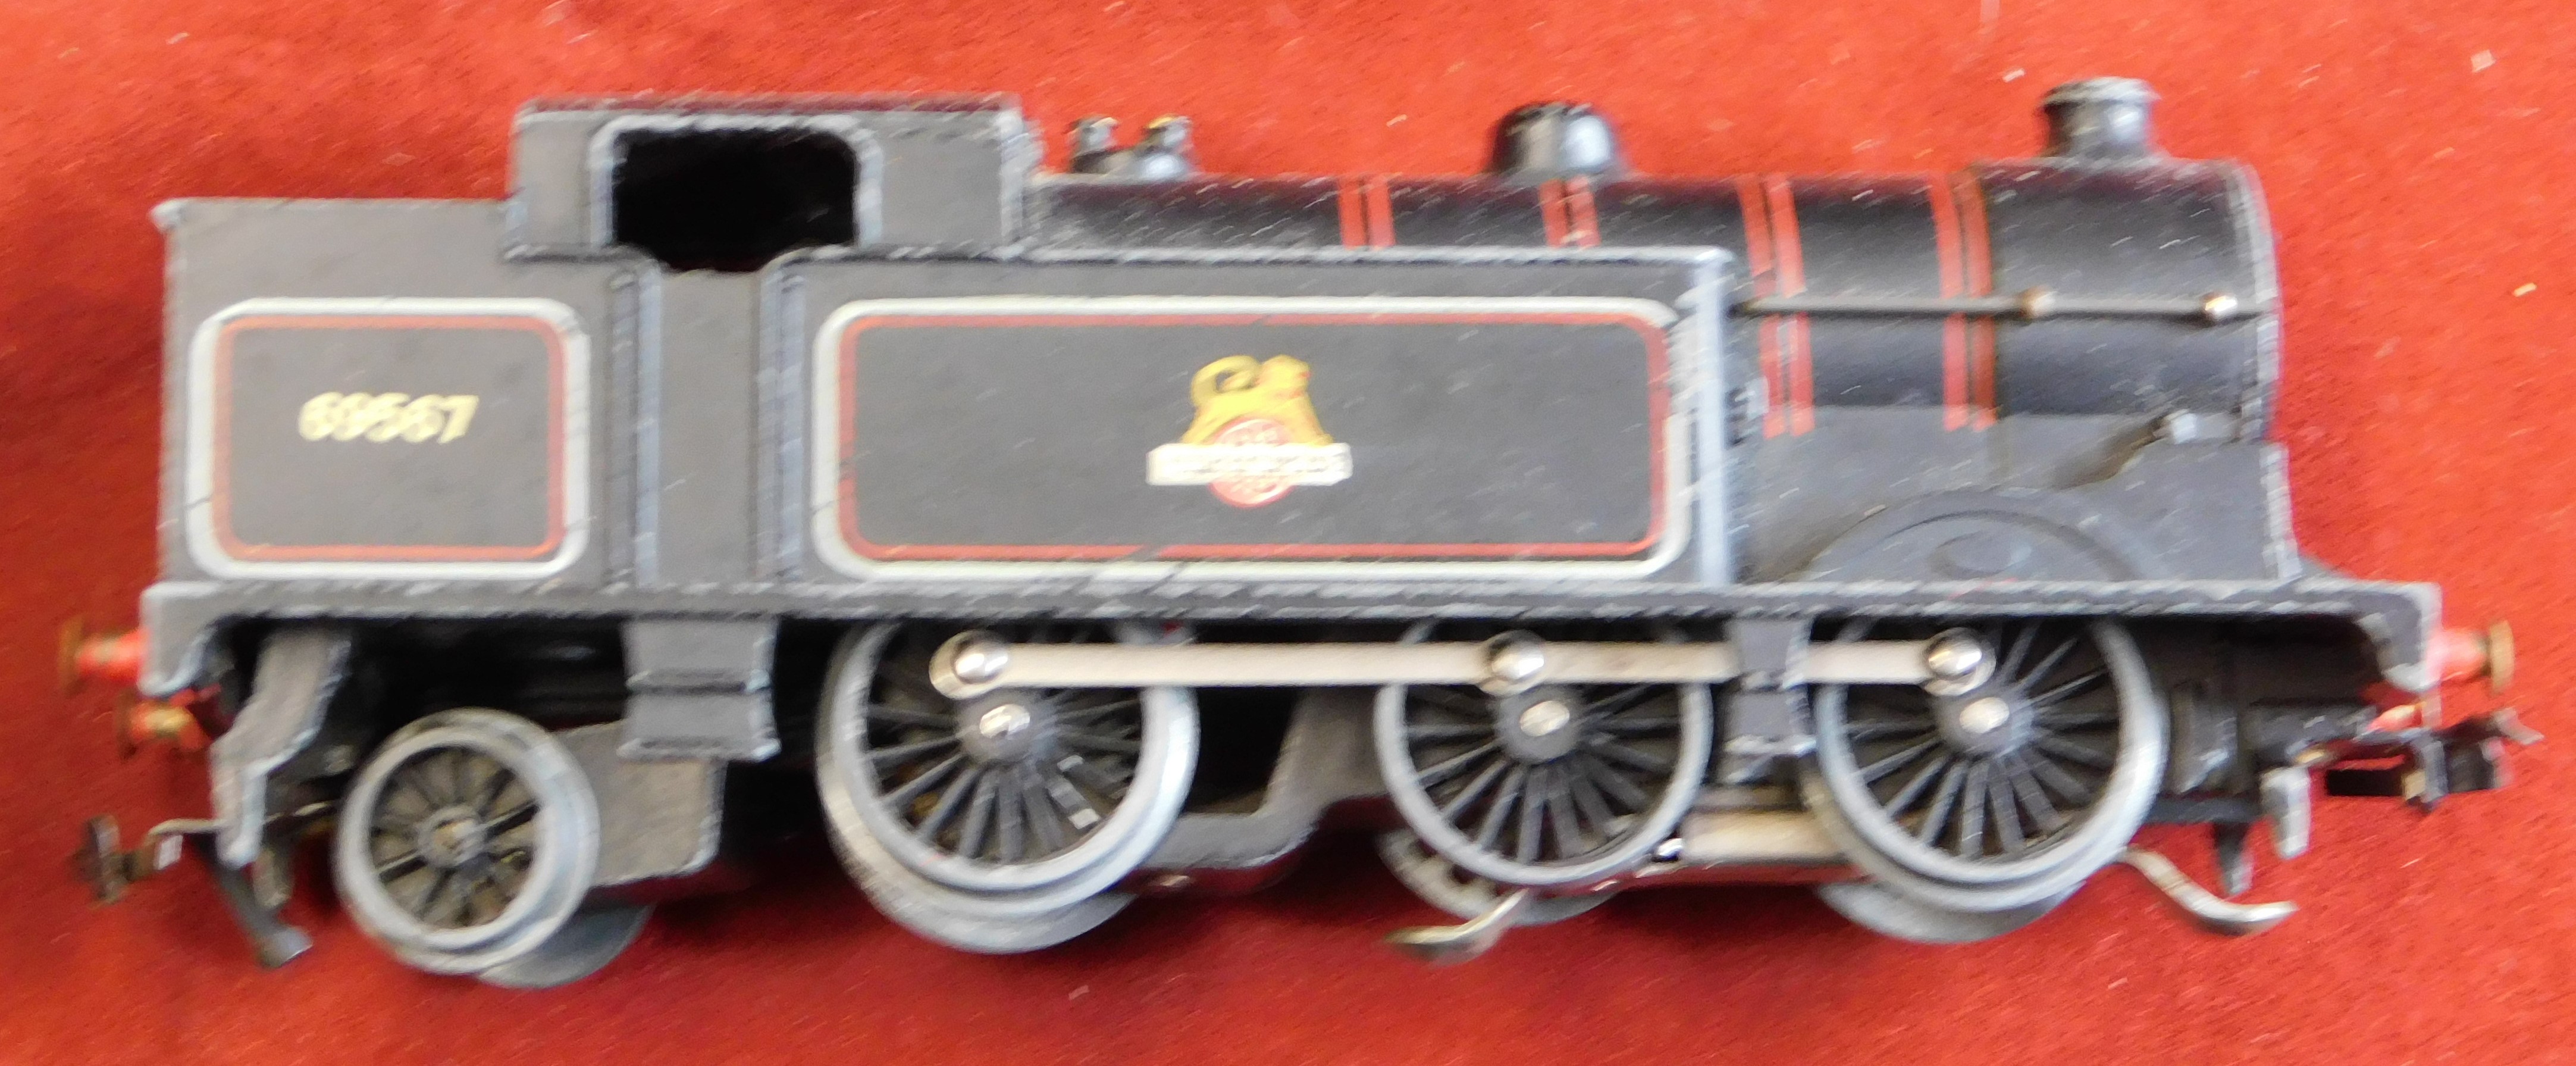 Hornby Dublo 'OO' Gauge 4x various locomotives, 4x various wagons and coaches - Image 5 of 6